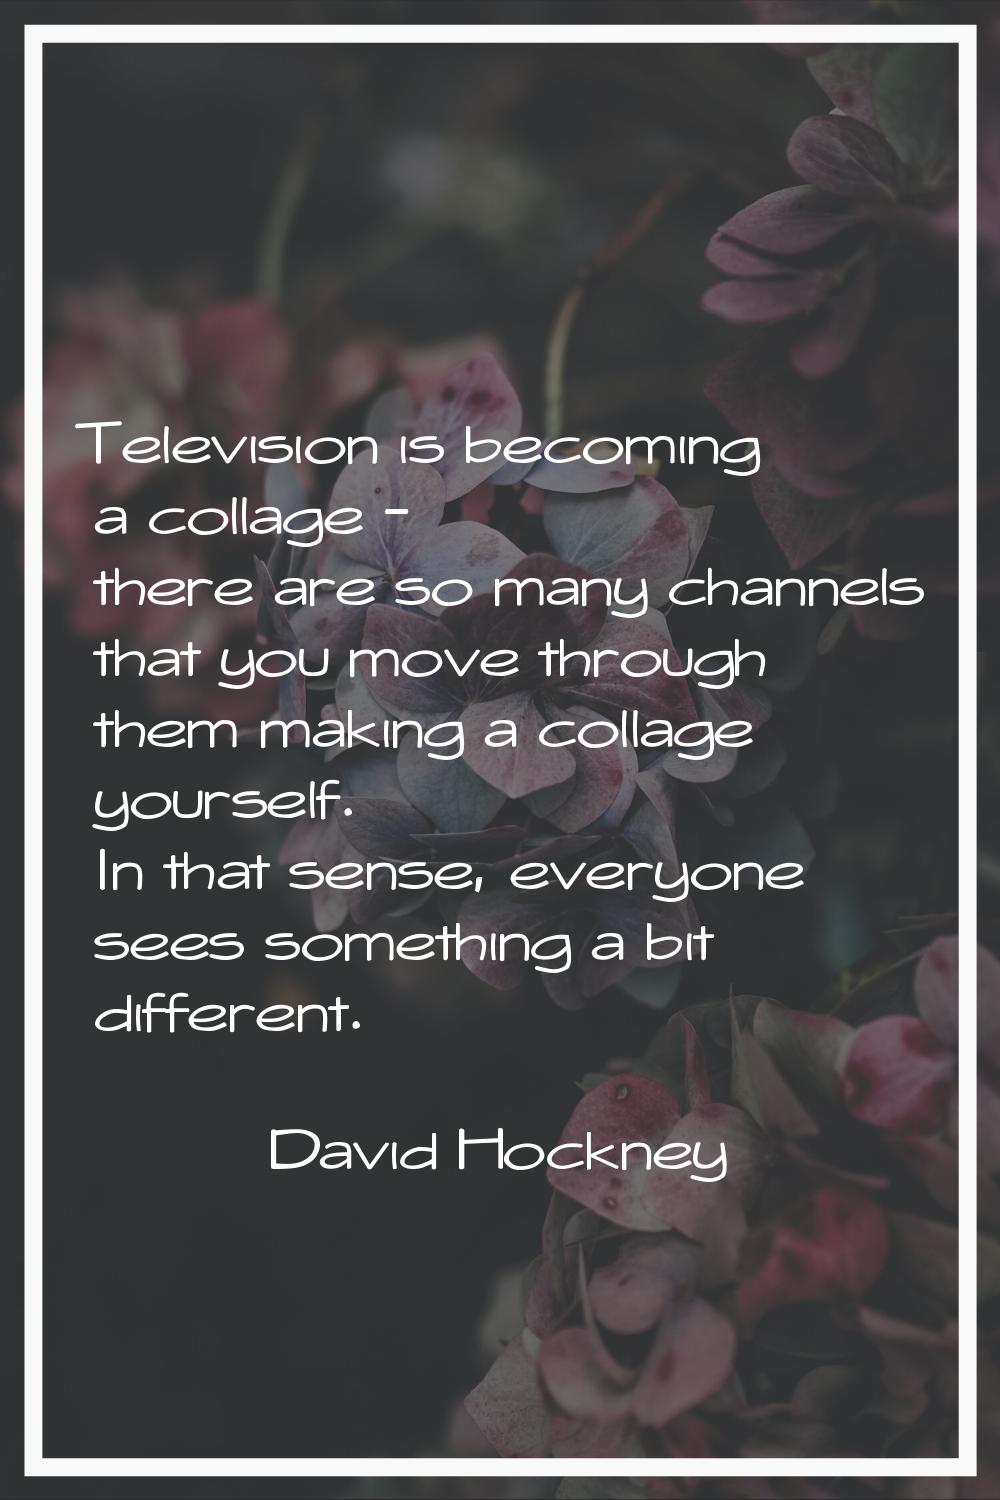 Television is becoming a collage - there are so many channels that you move through them making a c